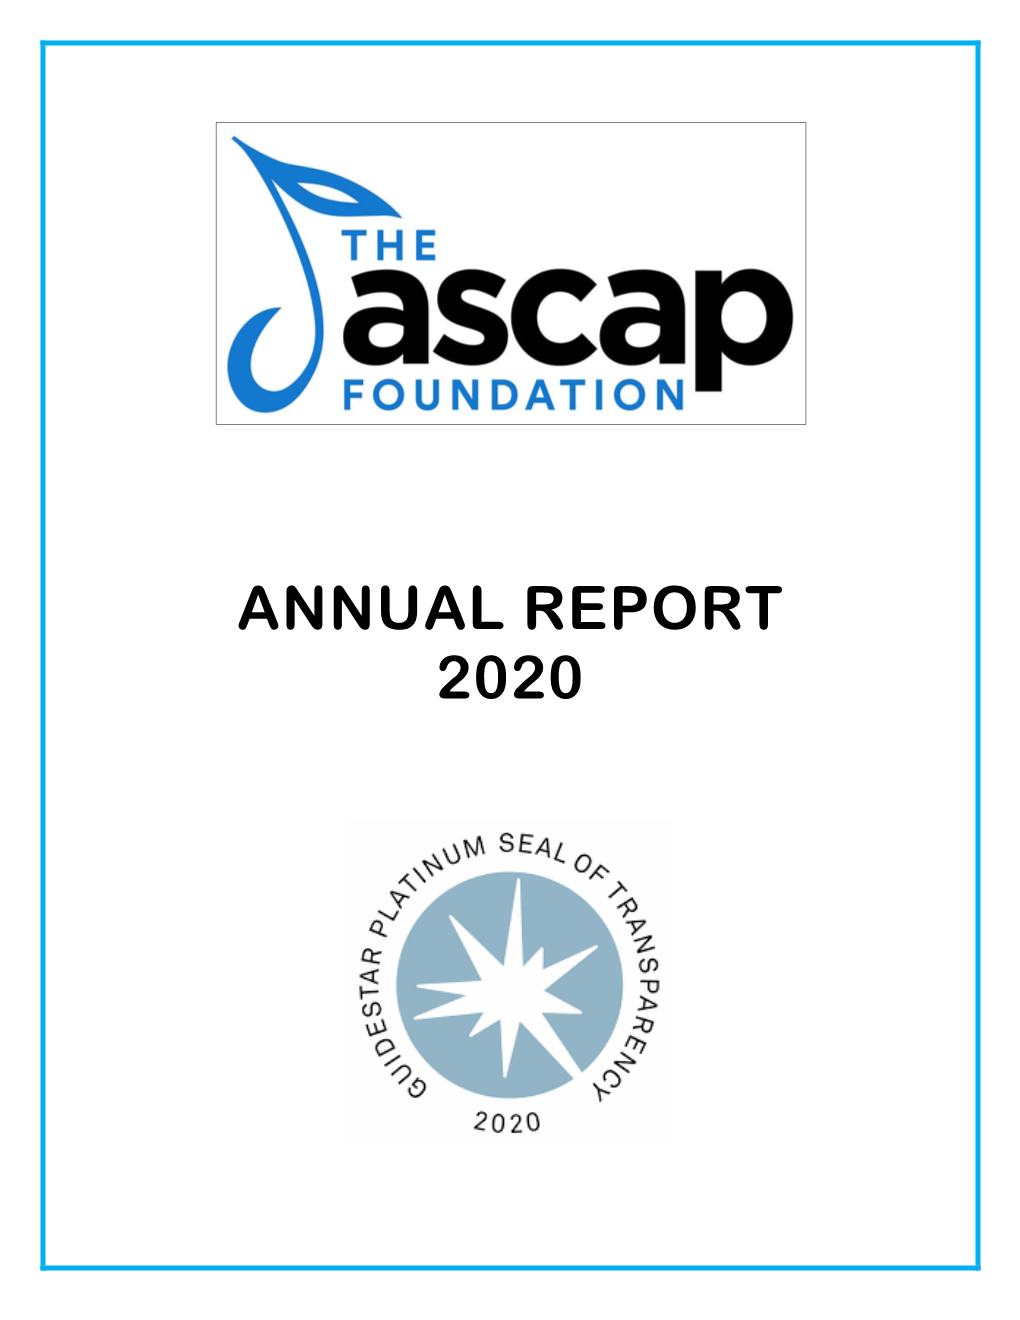 The ASCAP Foundation Annual Report 2020